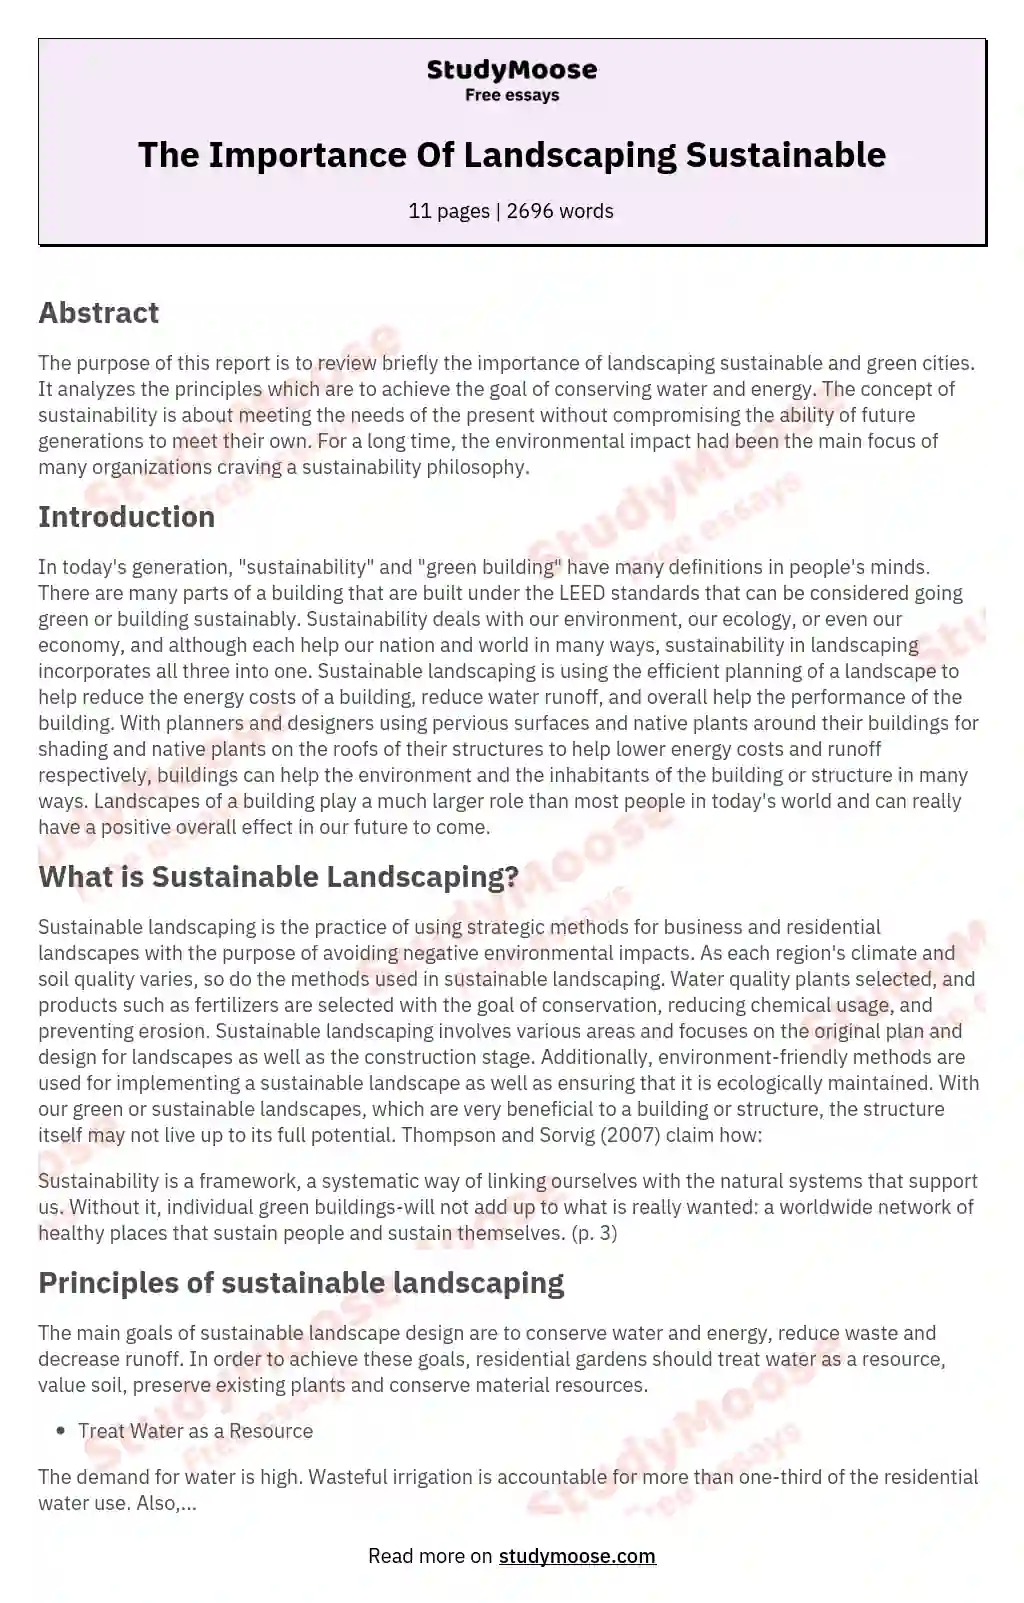 The Importance Of Landscaping Sustainable essay